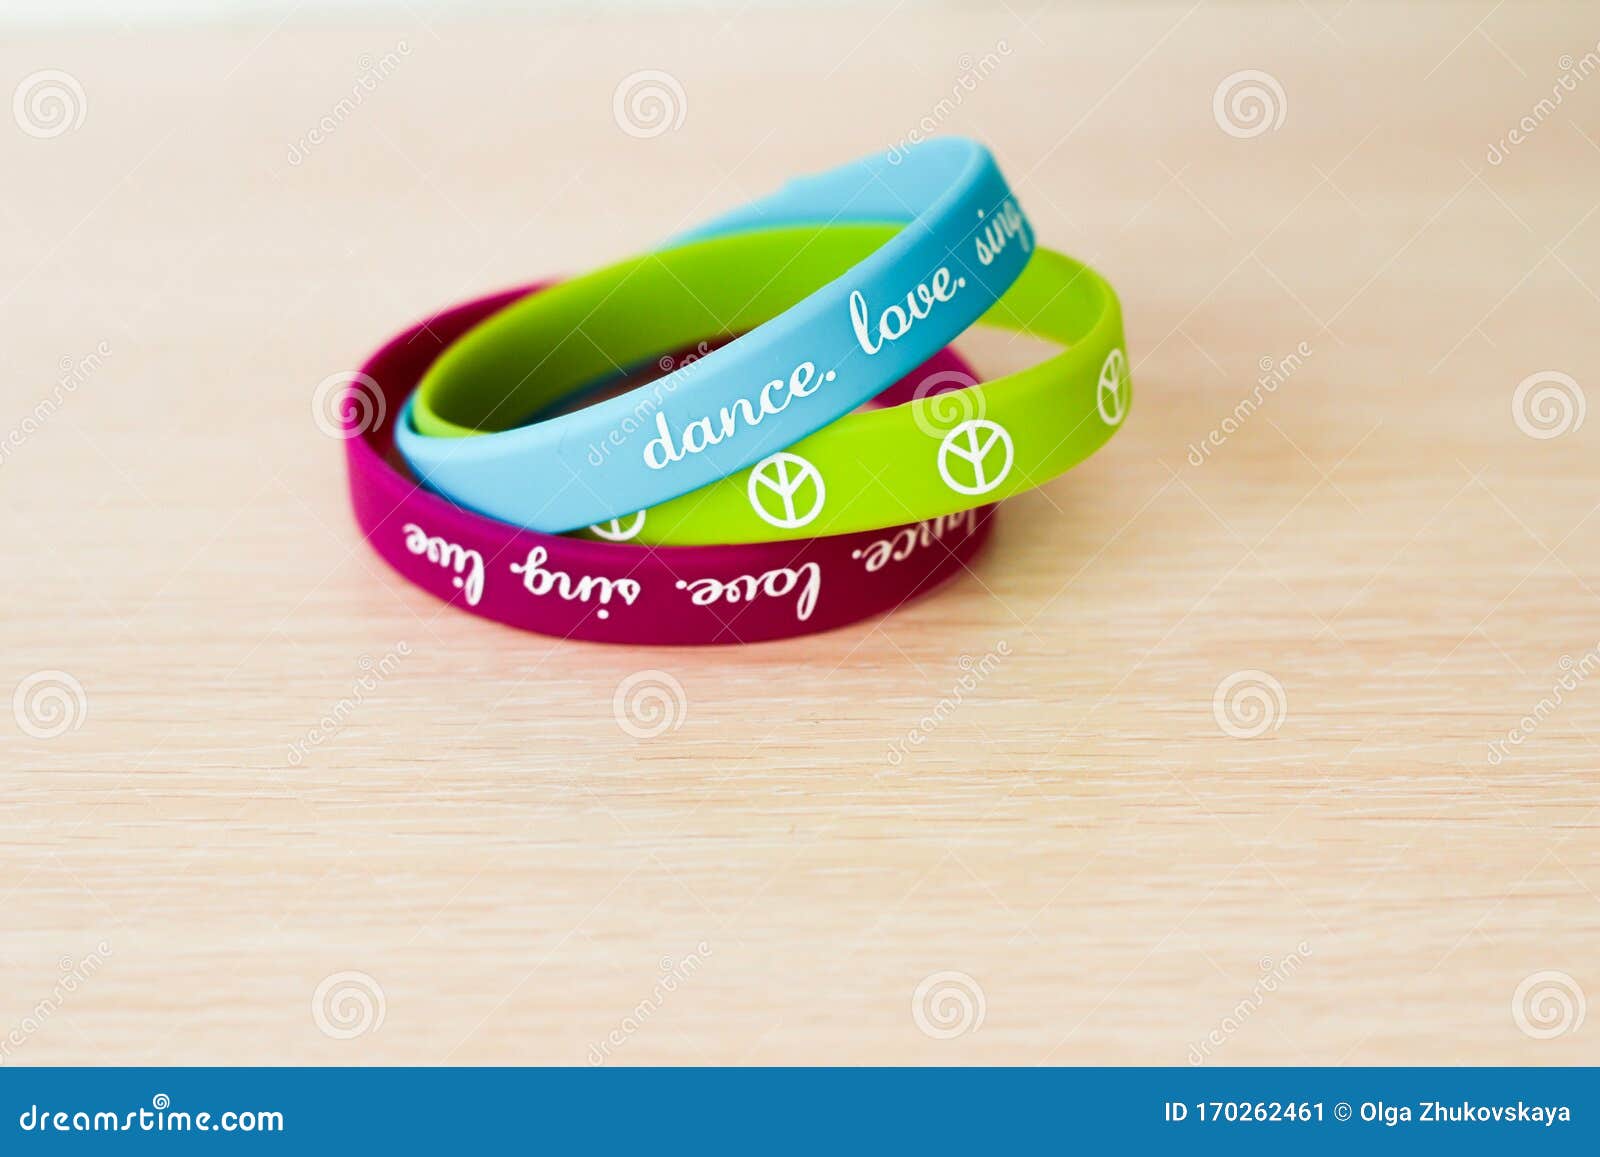 colored rubber bracelets with inscriptions on beige background